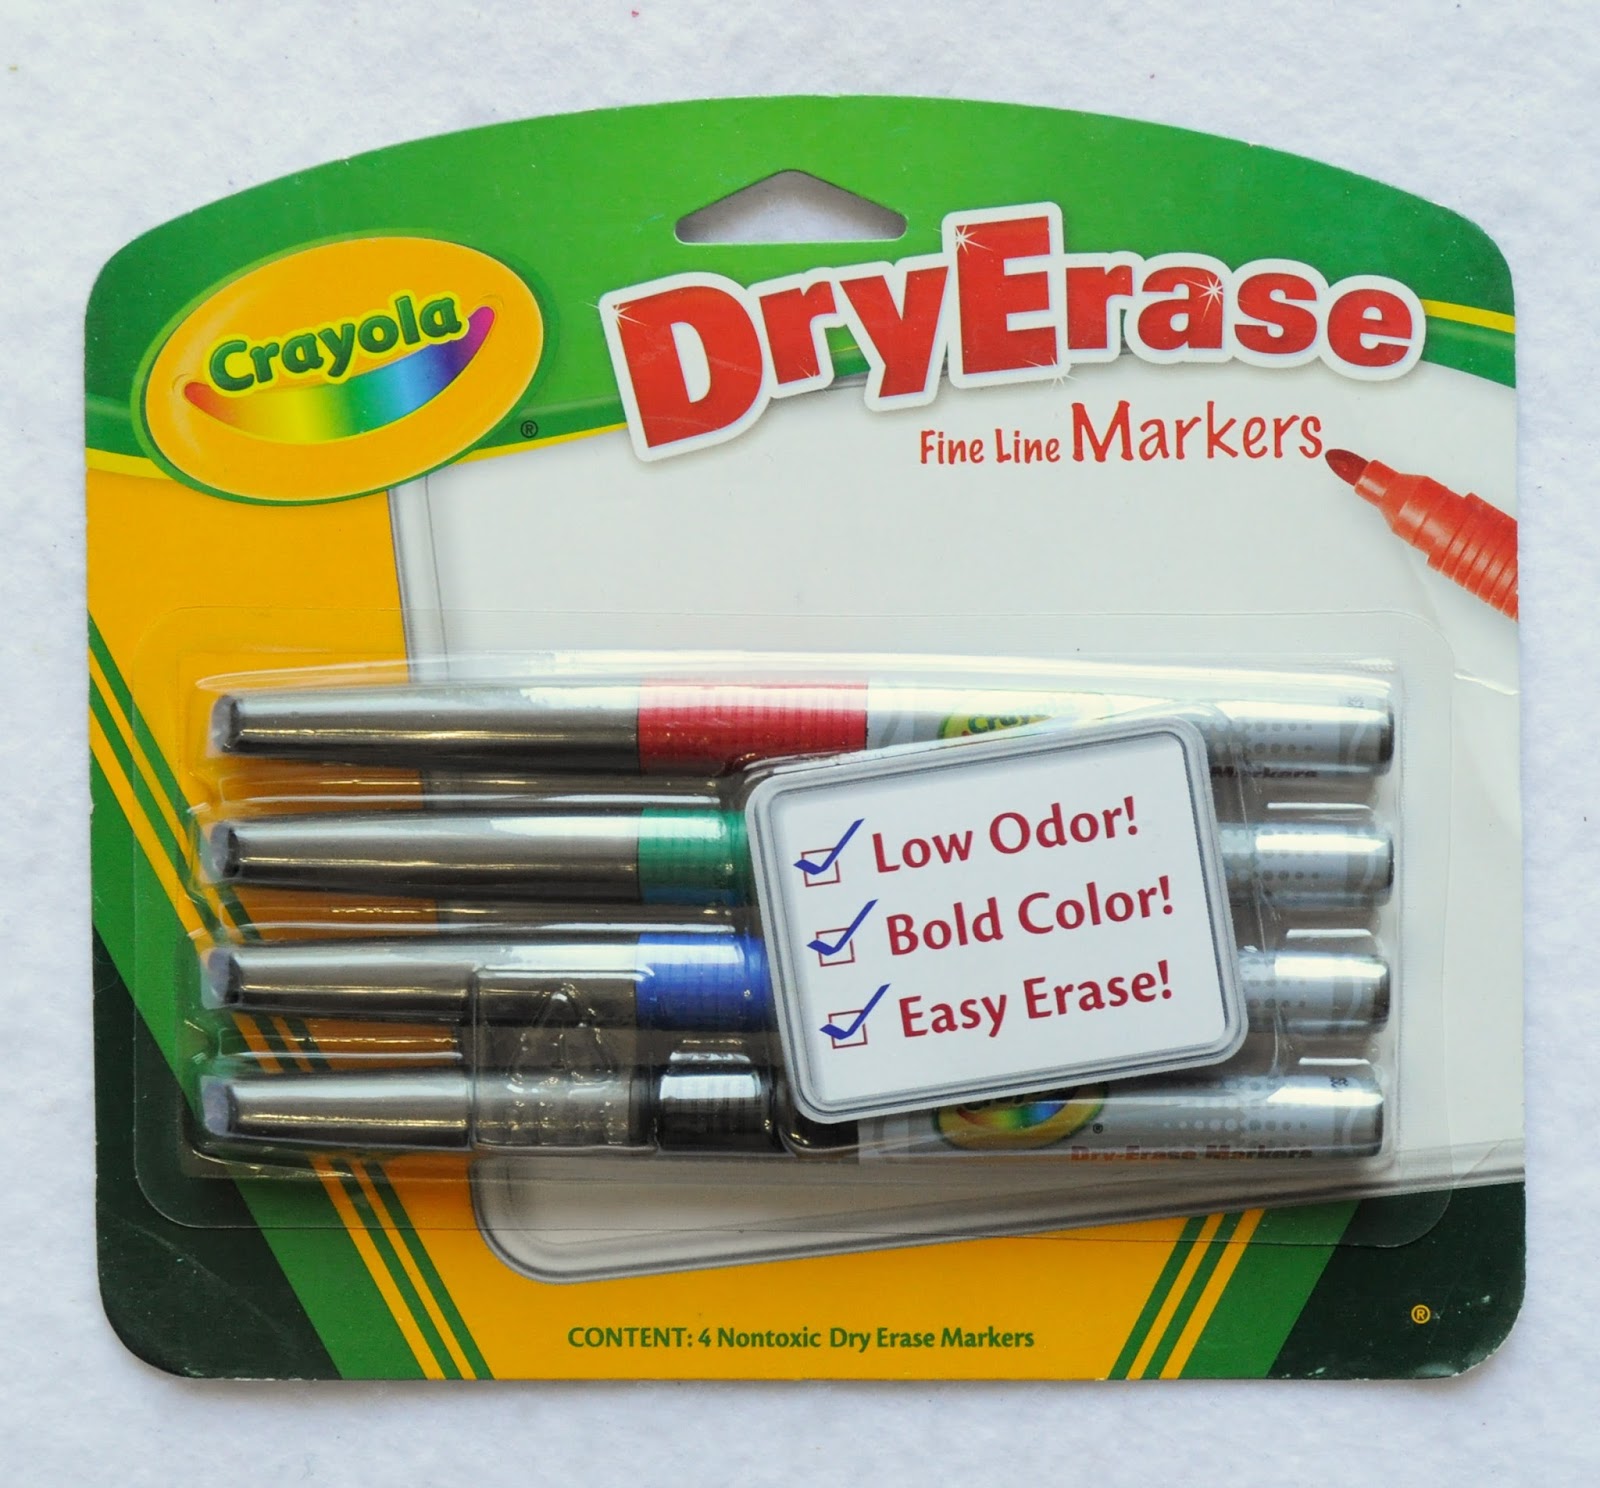 DryErase Fine Line Markers: What's Inside the Box